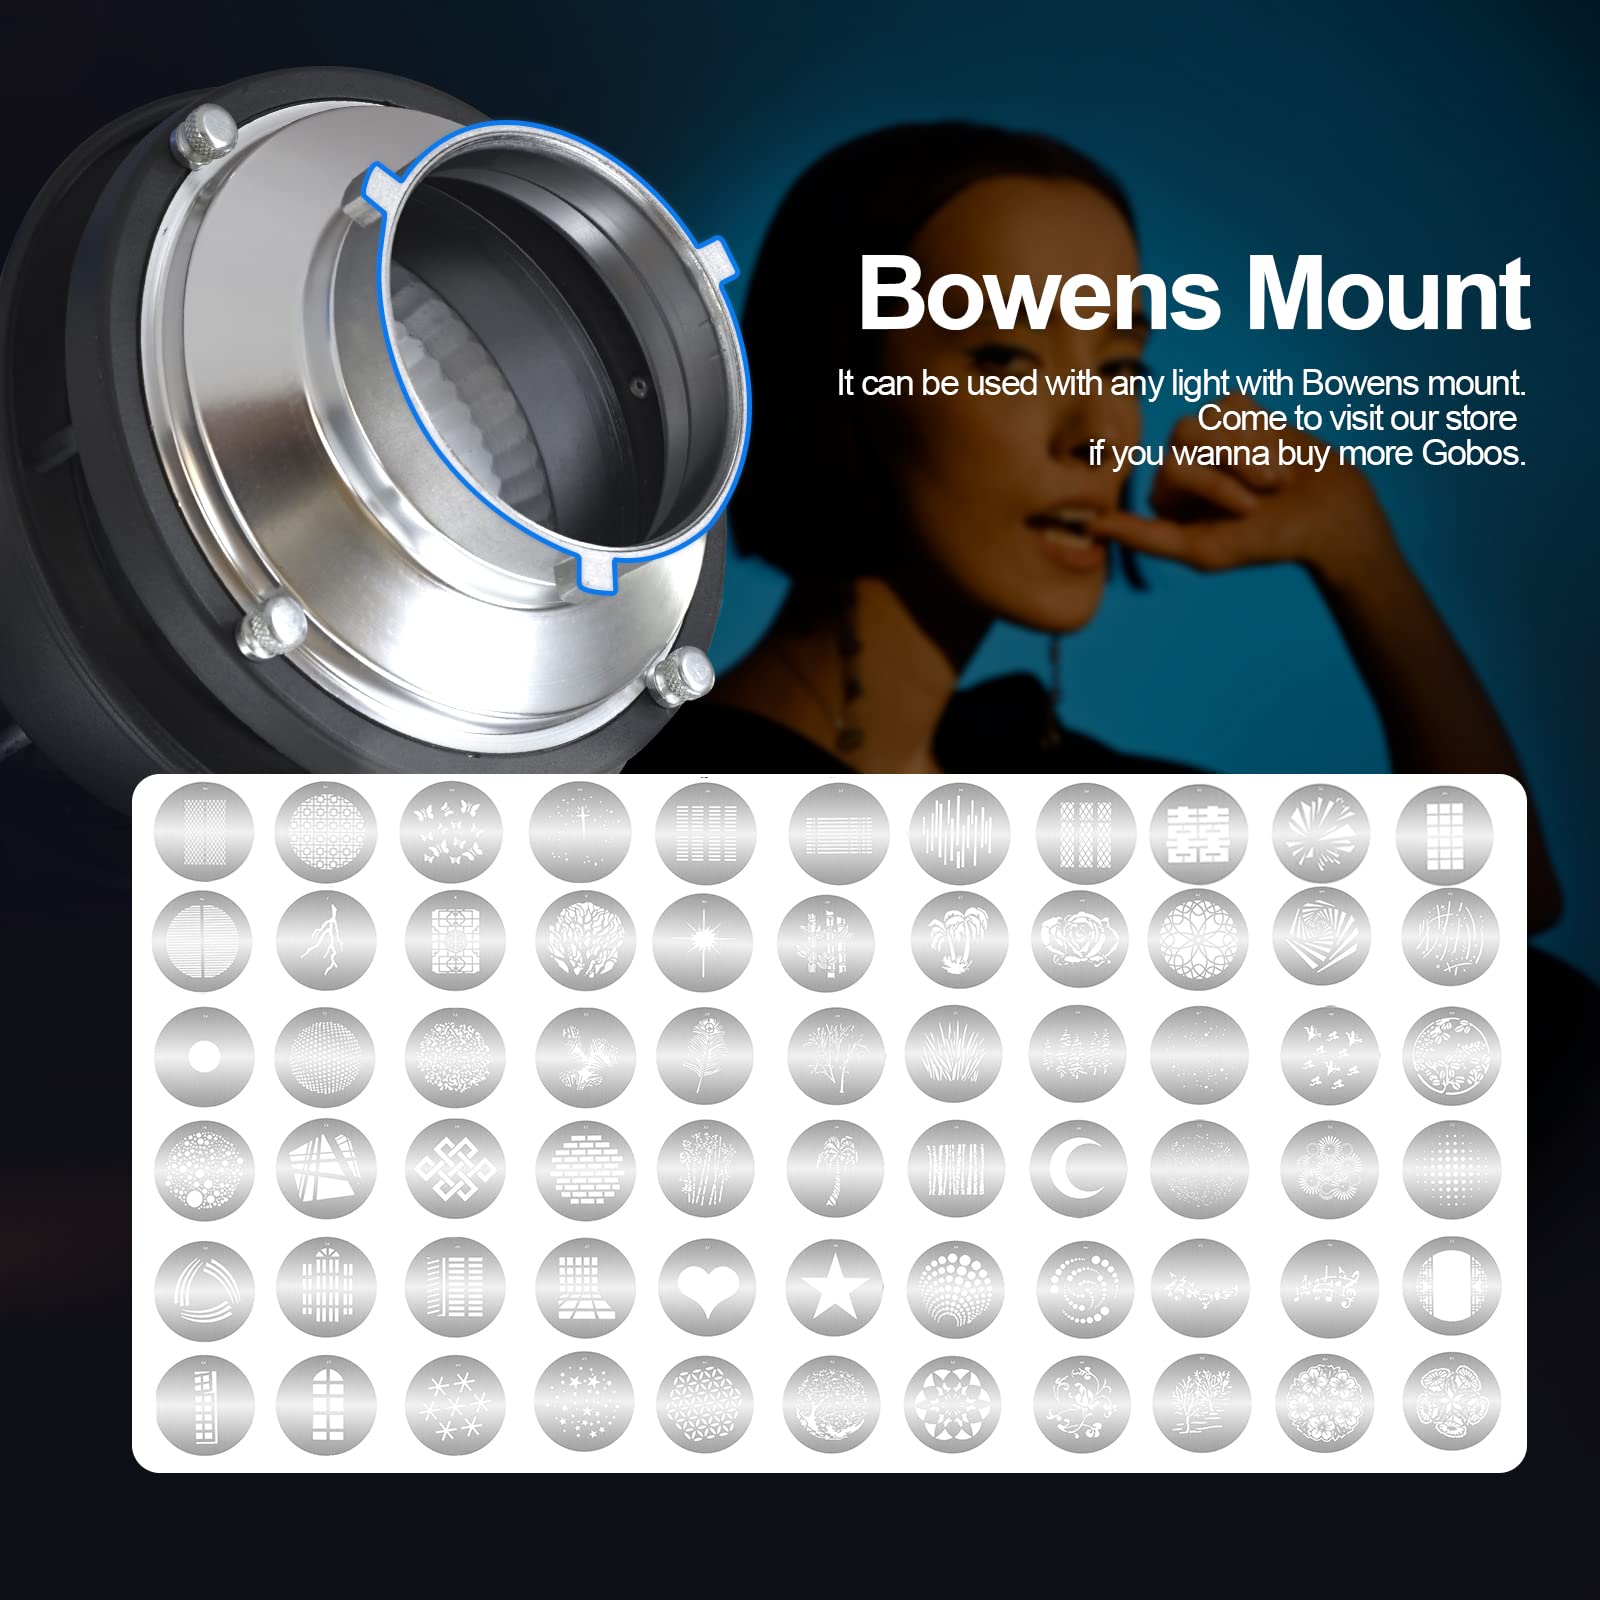 Wellmaking Bowens Mount Flash snoot conical Lens Video Artist Modelling Shape Light Studio use with Optical Lens Various Gobos Bowens Photography Accessories